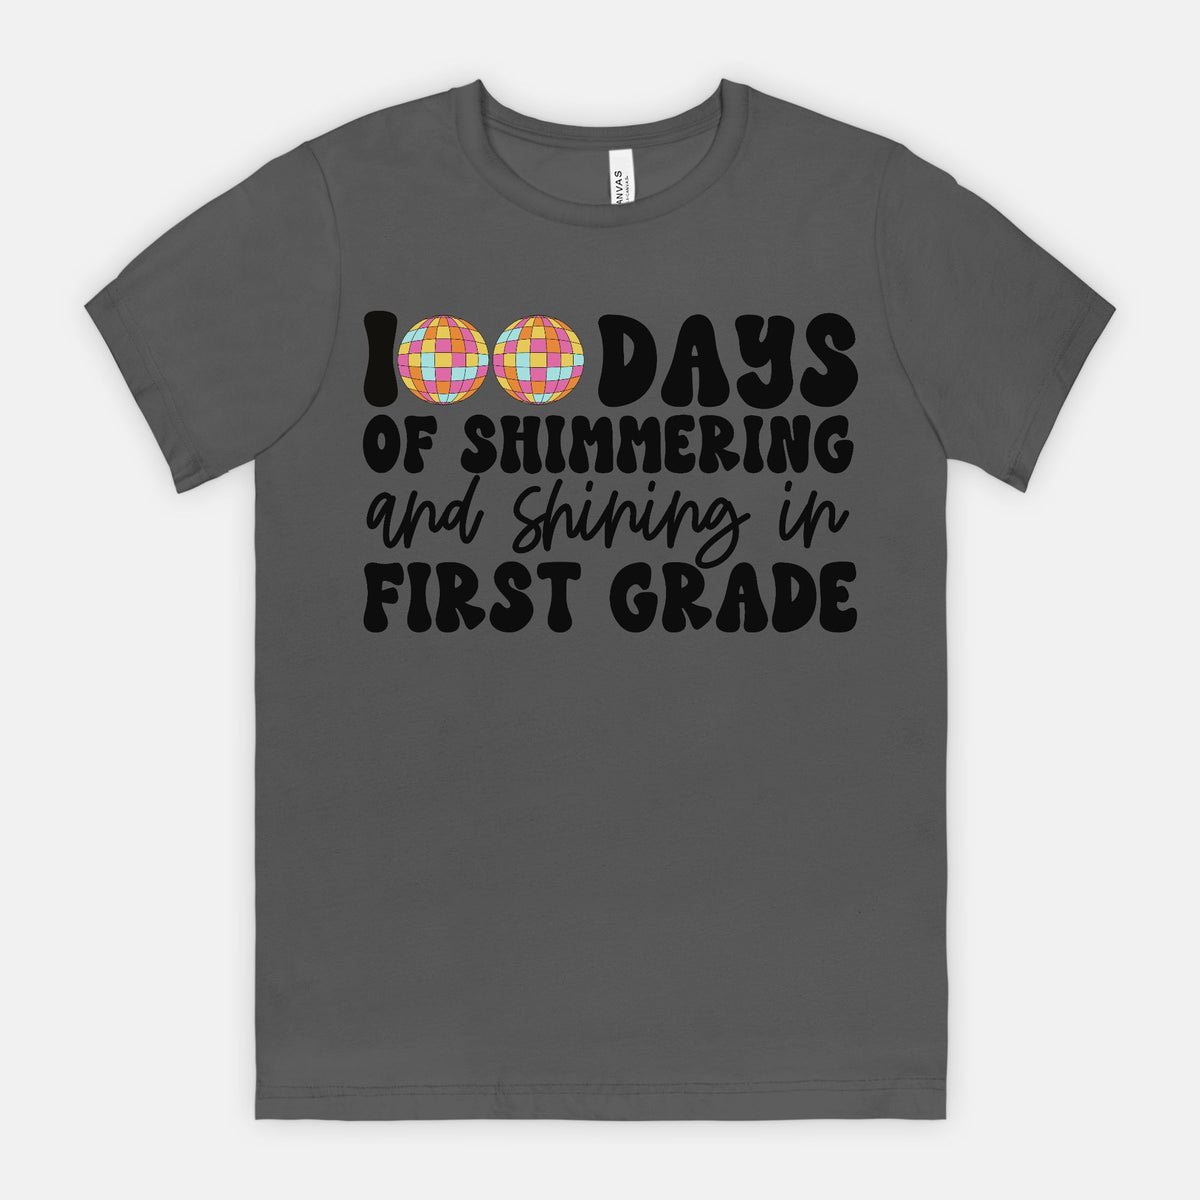 100 Days in First Grade Tee